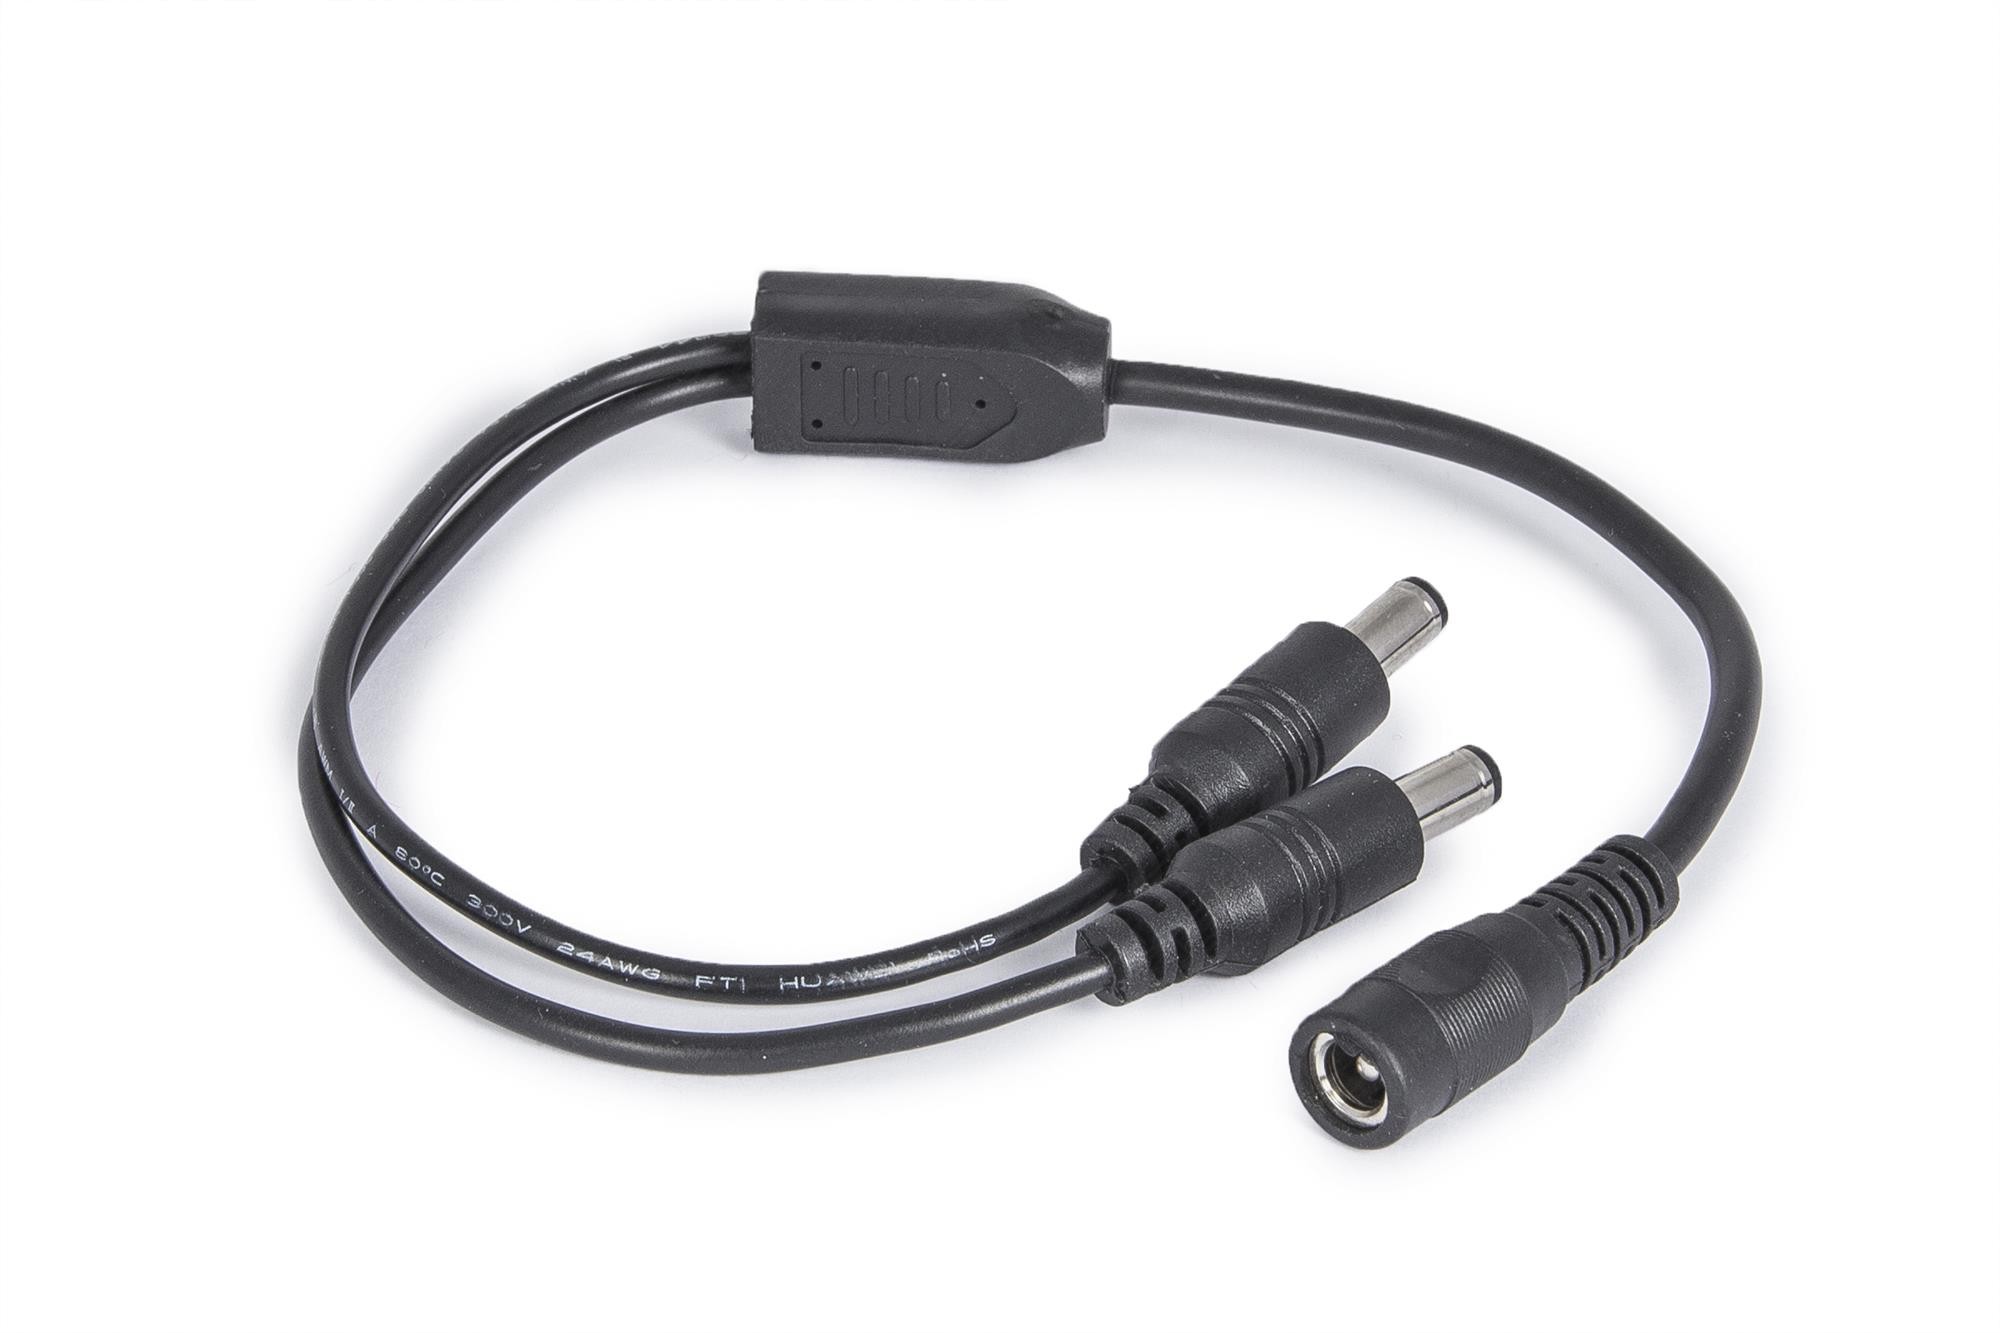 Y-Cable for two 12 V instruments on one Power Supply